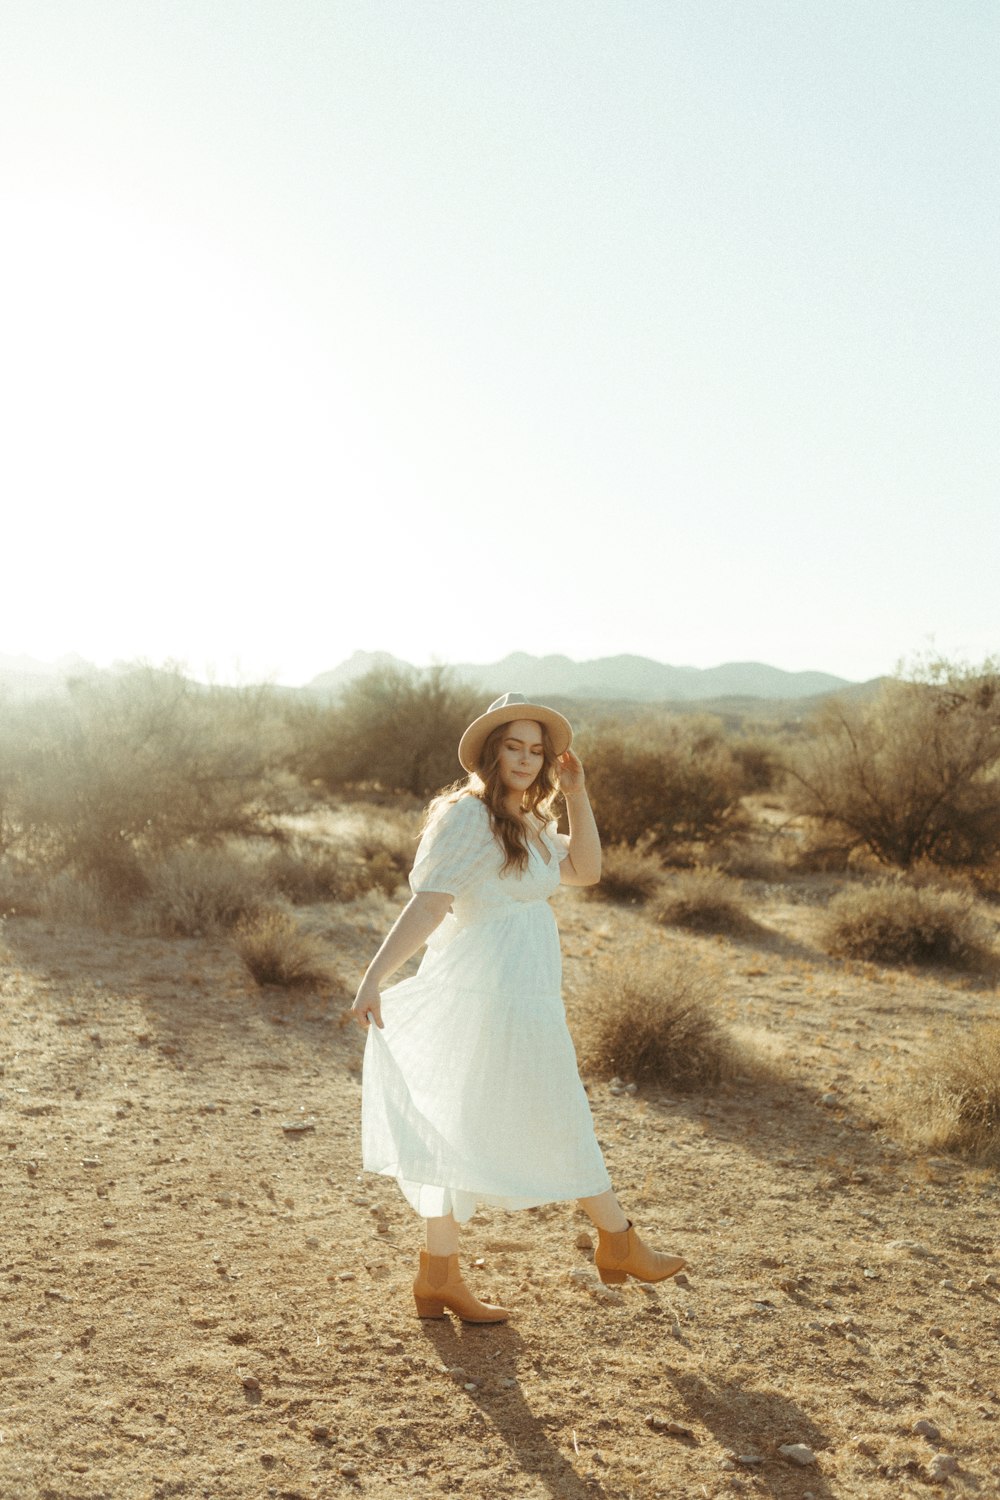 woman in white dress standing on brown field during daytime